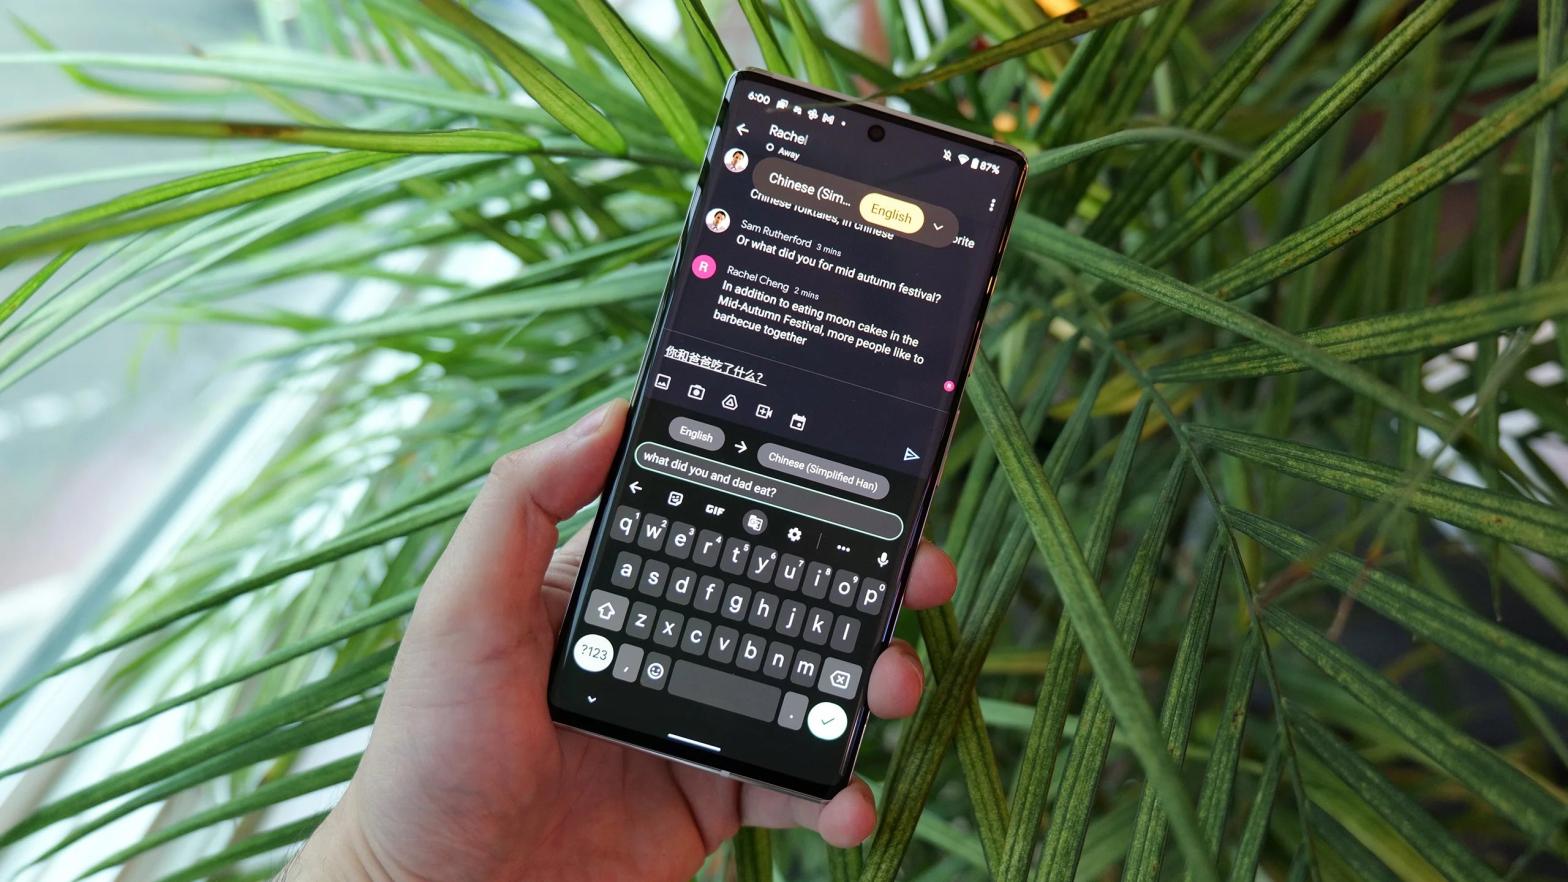 The Google Pixel 6 was first to see Live Translate features, though latest versions of Chrome's test browser show a Live Translate captions may soon be available on browsers. (Photo: Sam Rutherford / Gizmodo)